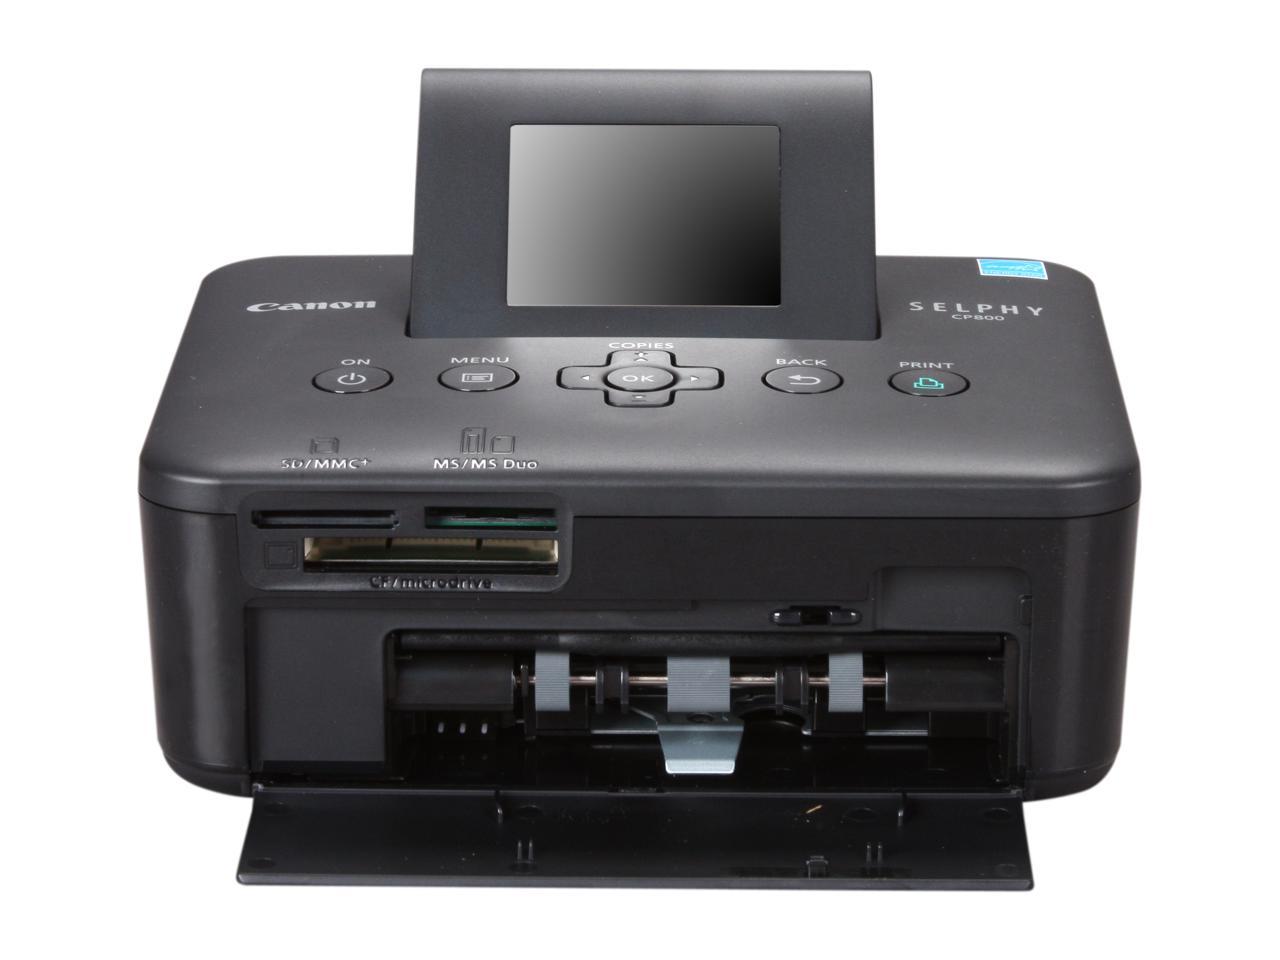 Canon Selphy Cp800 4350b001 Usb Dye Sublimation Photo Color Printer 0247